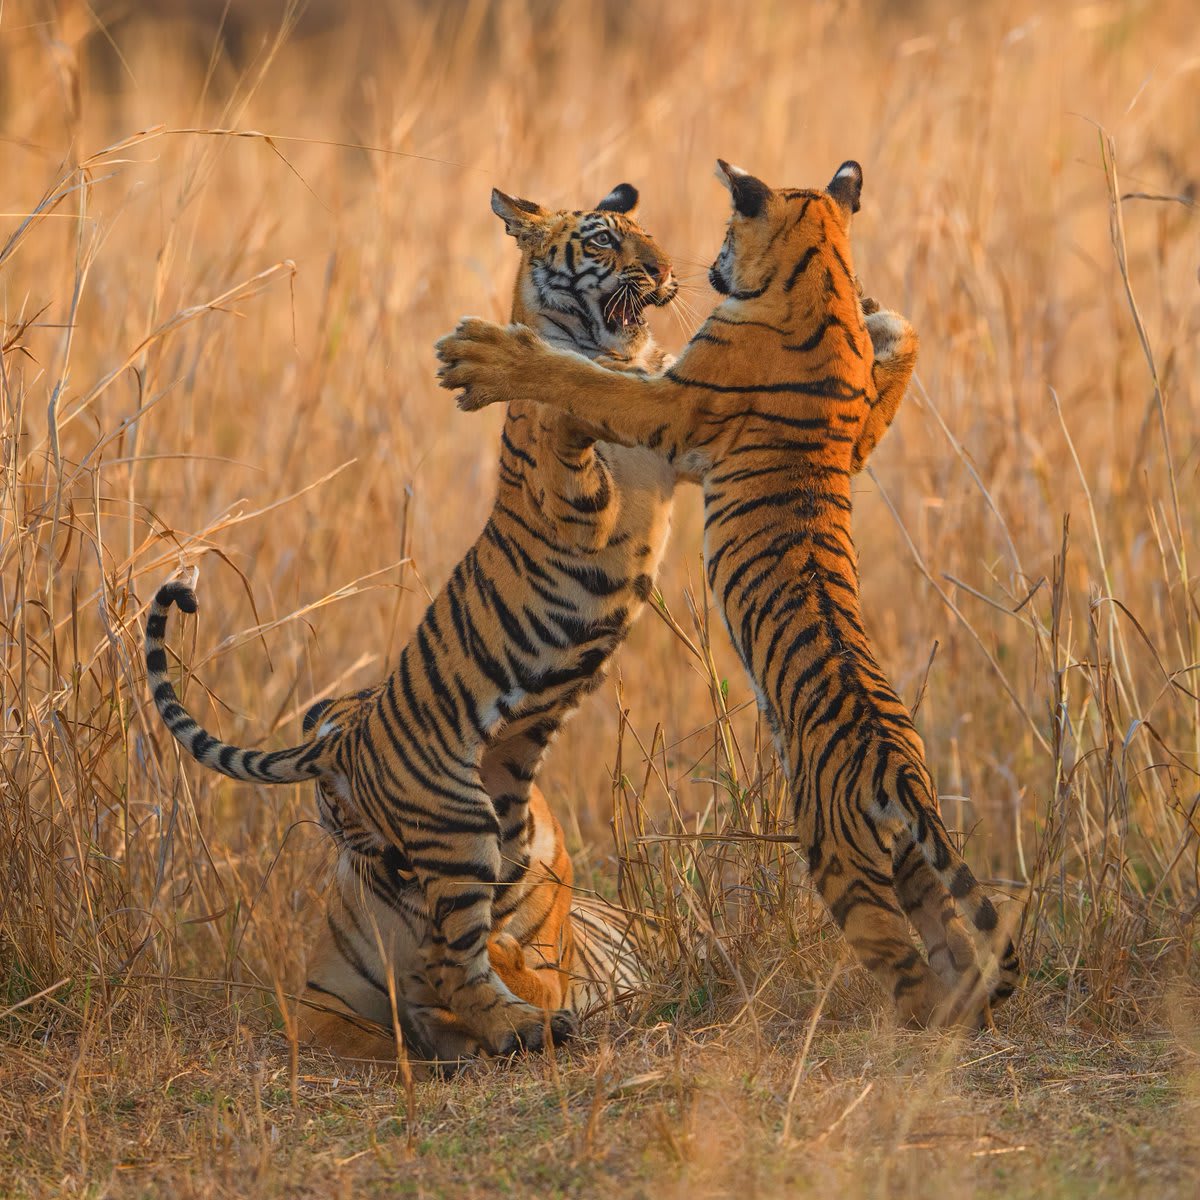 Image by Morten Ross Twinning tiger cubs play in Maharashtra, India.